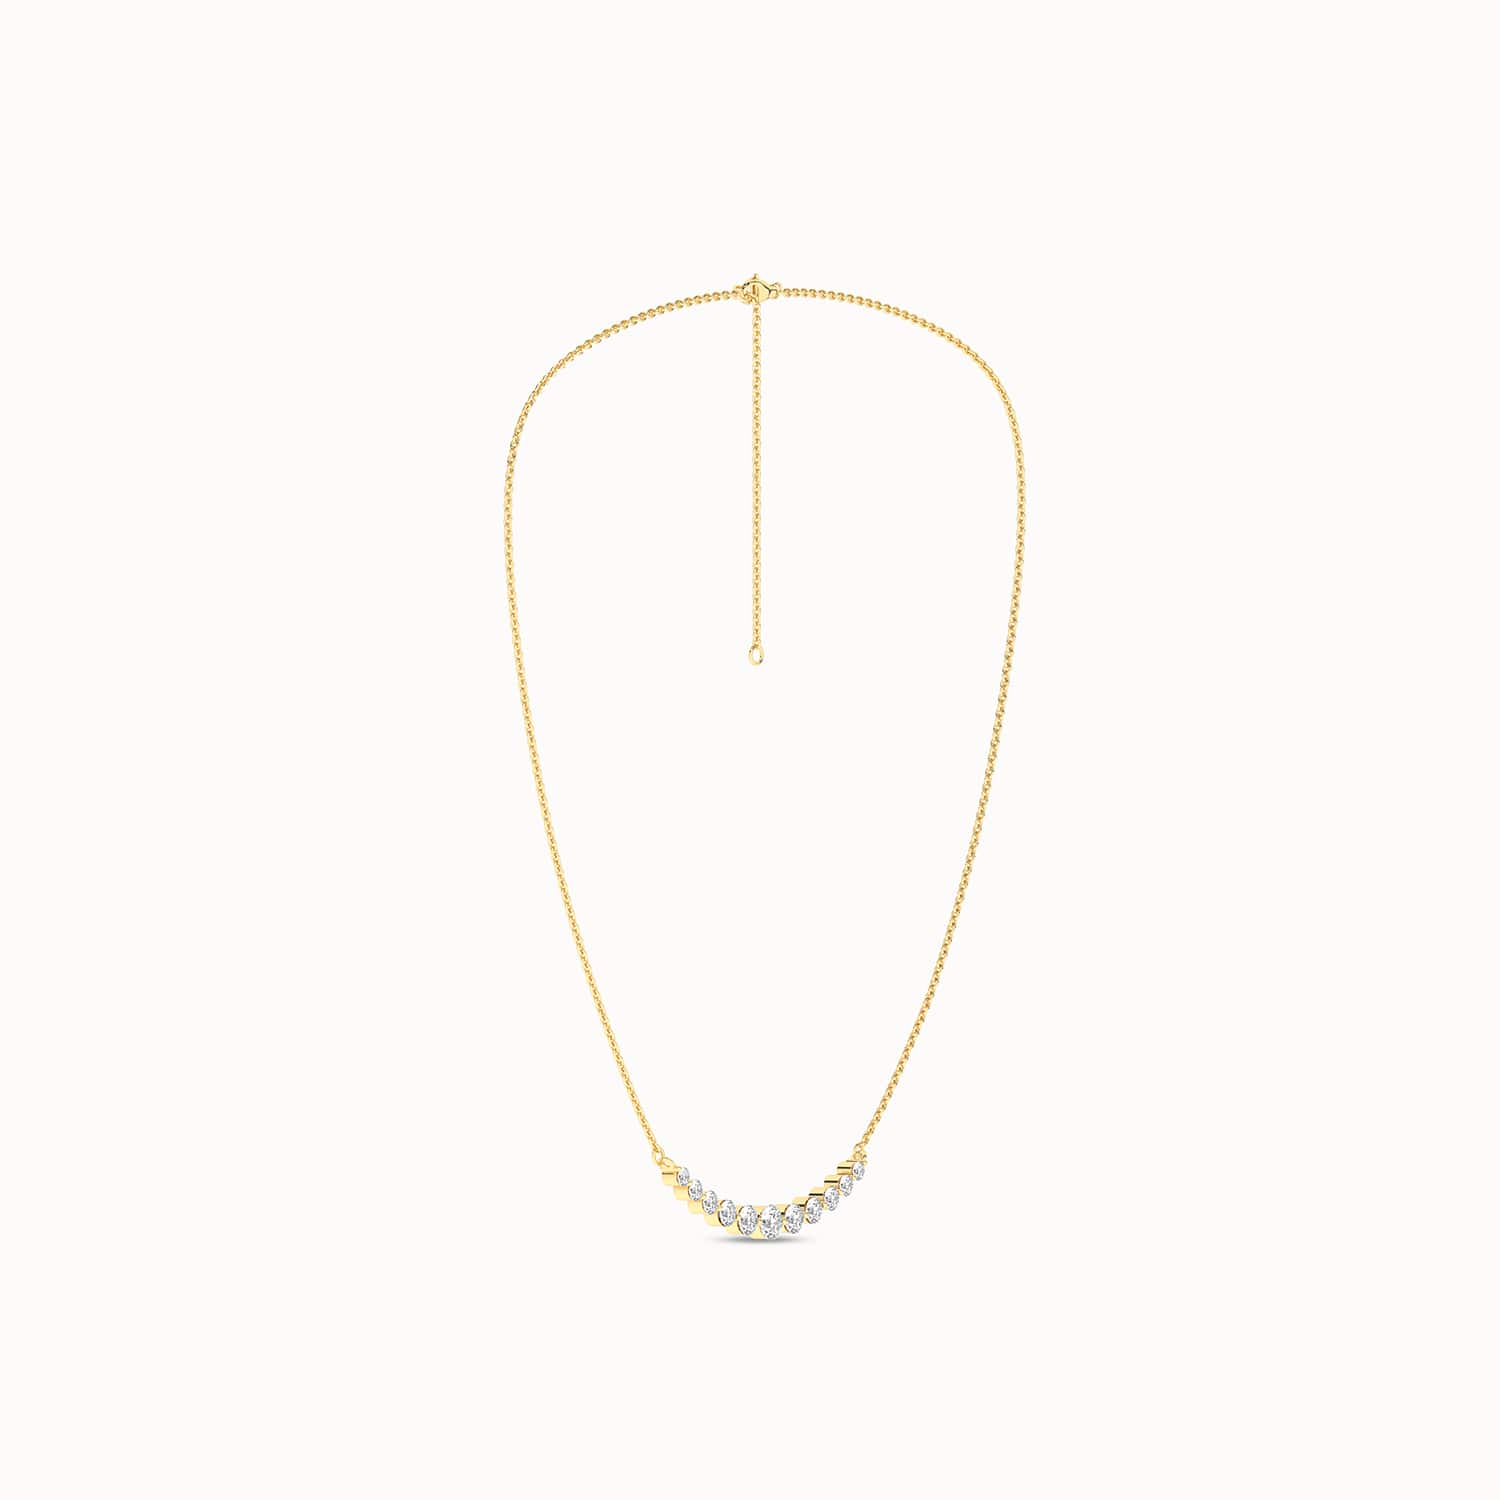 Captivating Necklace_Product Angle_1/2Ct. - 1